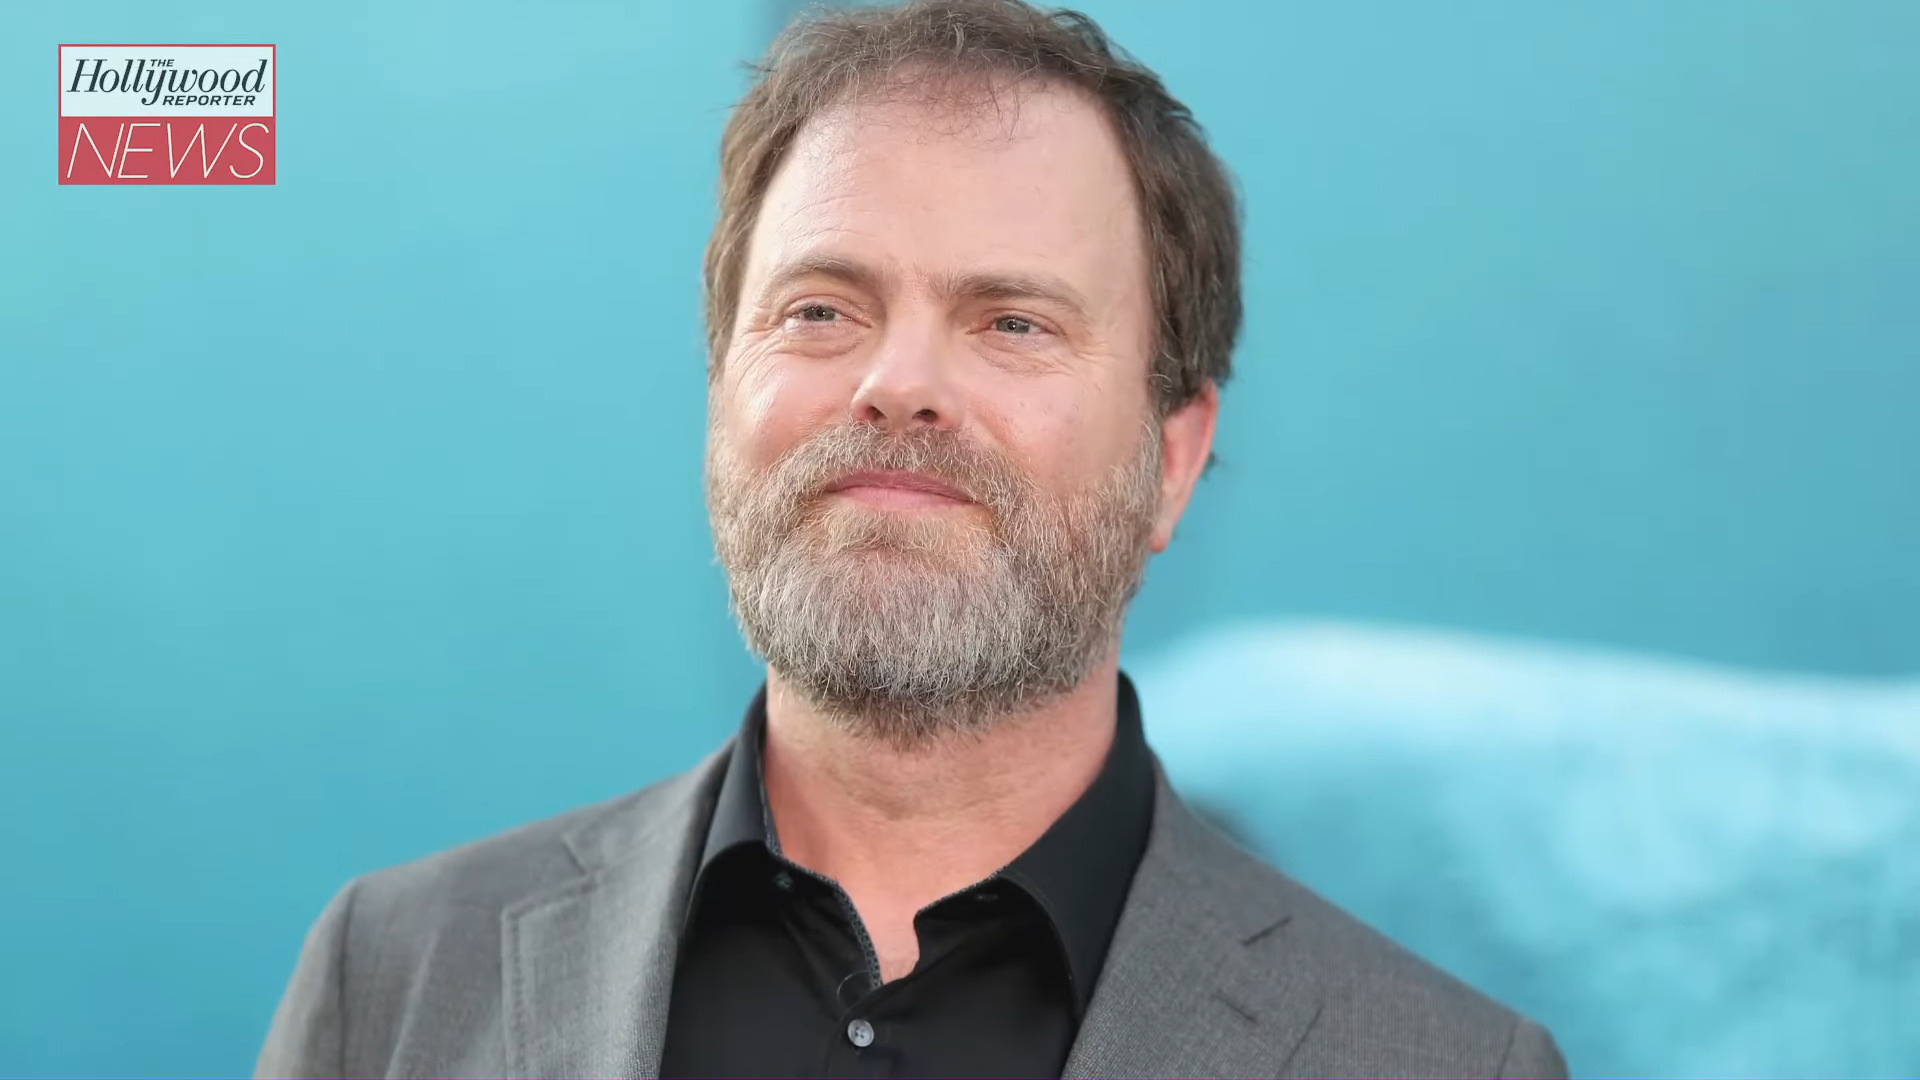 ‘The Office’ star Rainn Wilson changes his name to raise awareness of the climate crisis